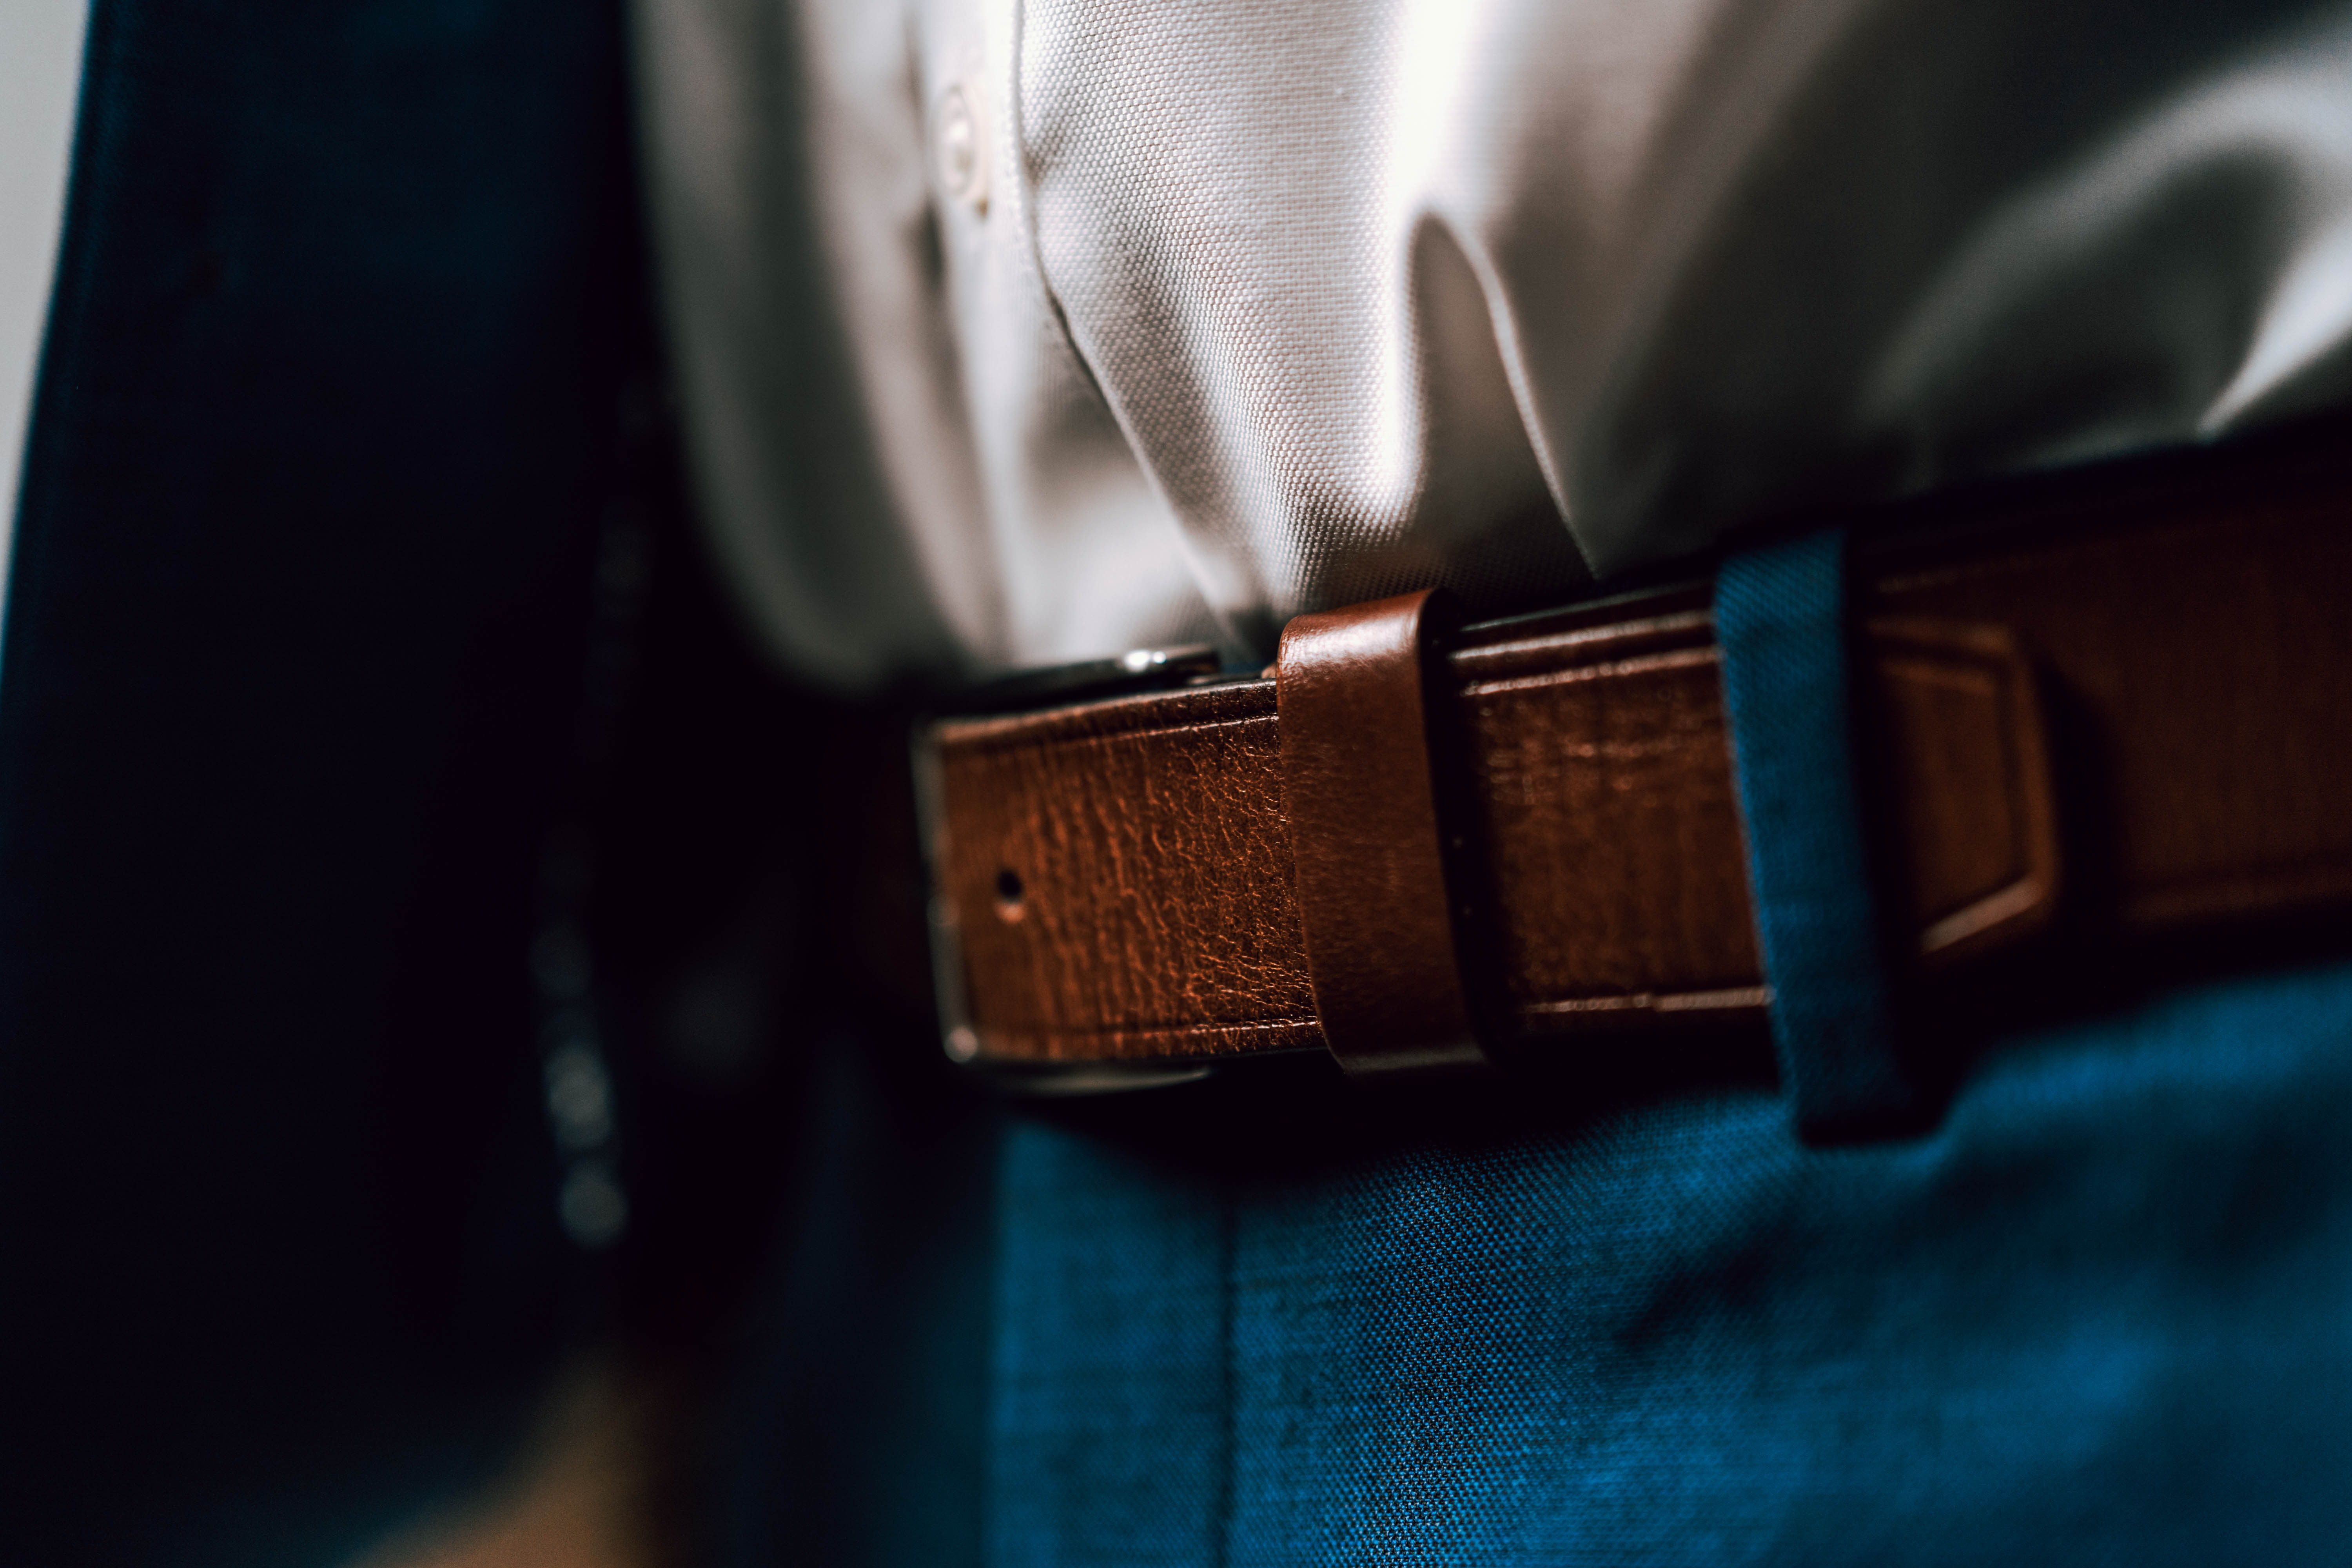 Lenny took off his belt & fastened it around the man's wounded leg to stop the blood flow. | Source: Unsplash